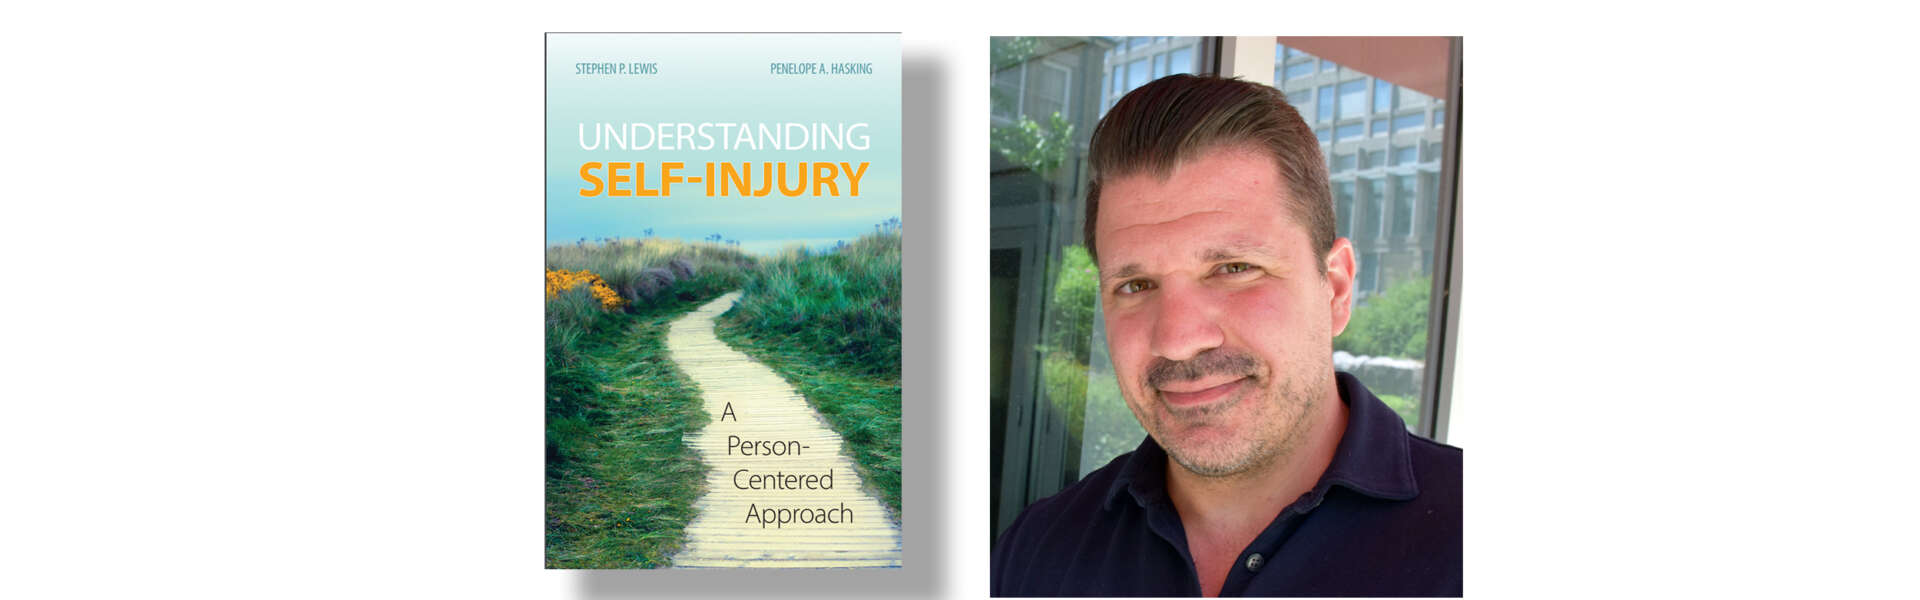 The cover of the book "Understanding Self-Injury: A Person-Centered Approach" and a portrait of Dr. Stephen Lewis